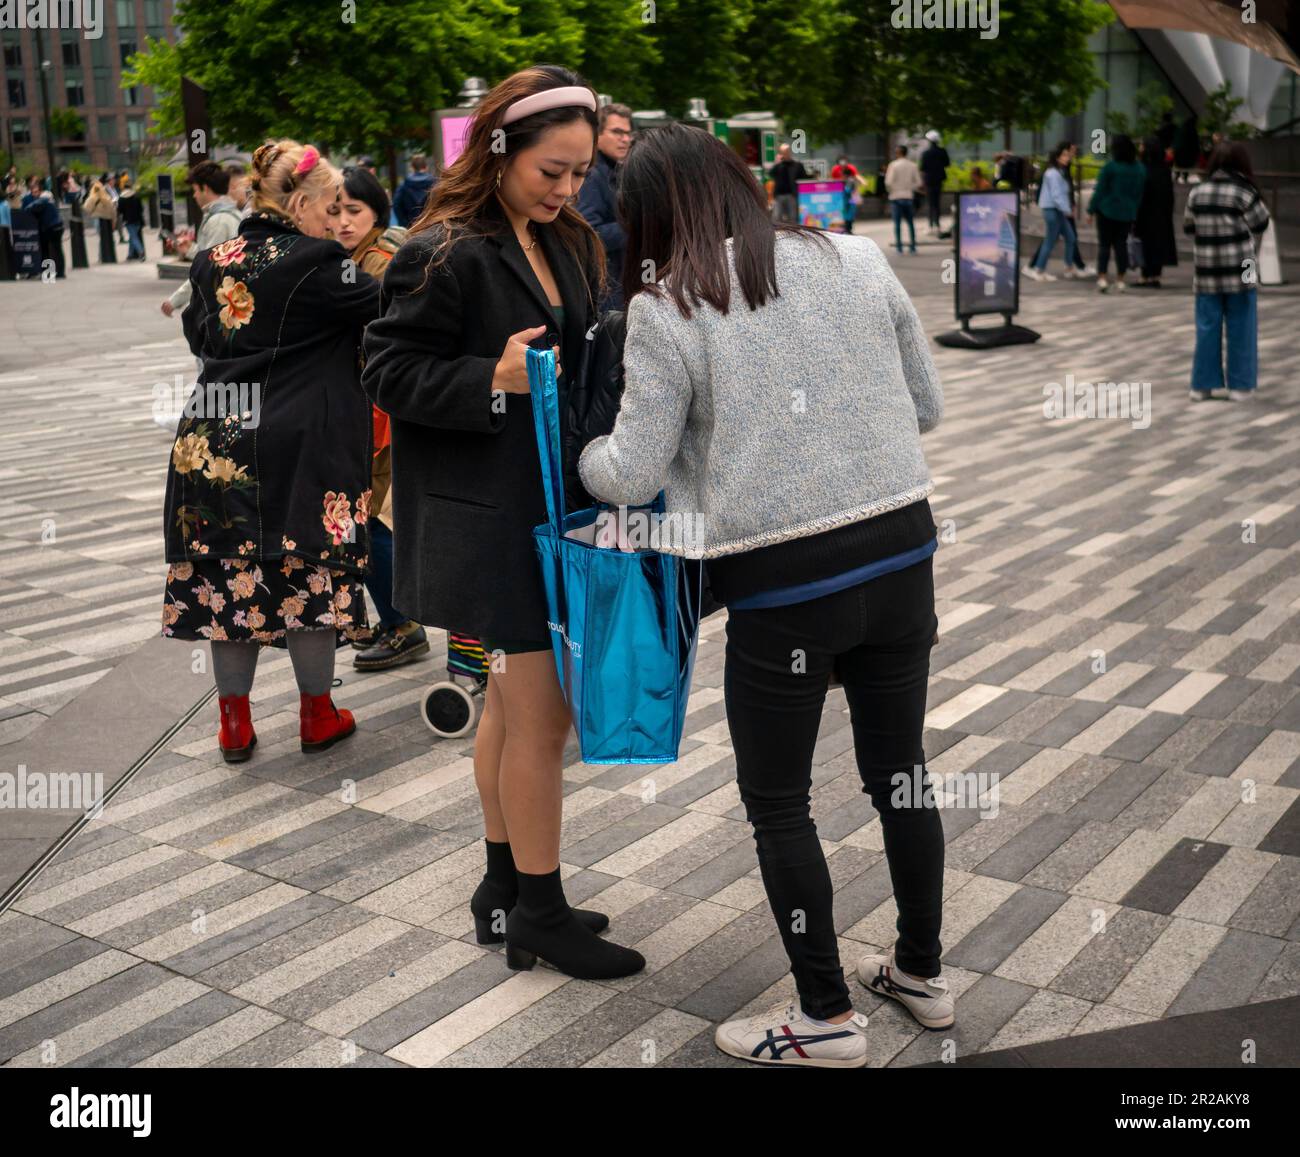 Visitors to Hudson Yards receive sunscreen samples after having their moles checked for skin cancer at a brand activation in Hudson Yards in New York for La Roche-Posay Laboratoire Dermatologique on Monday, May 1, 2023. La Roche-Posay is a brand of LÕOreal. (© Richard B. Levine) Stock Photo